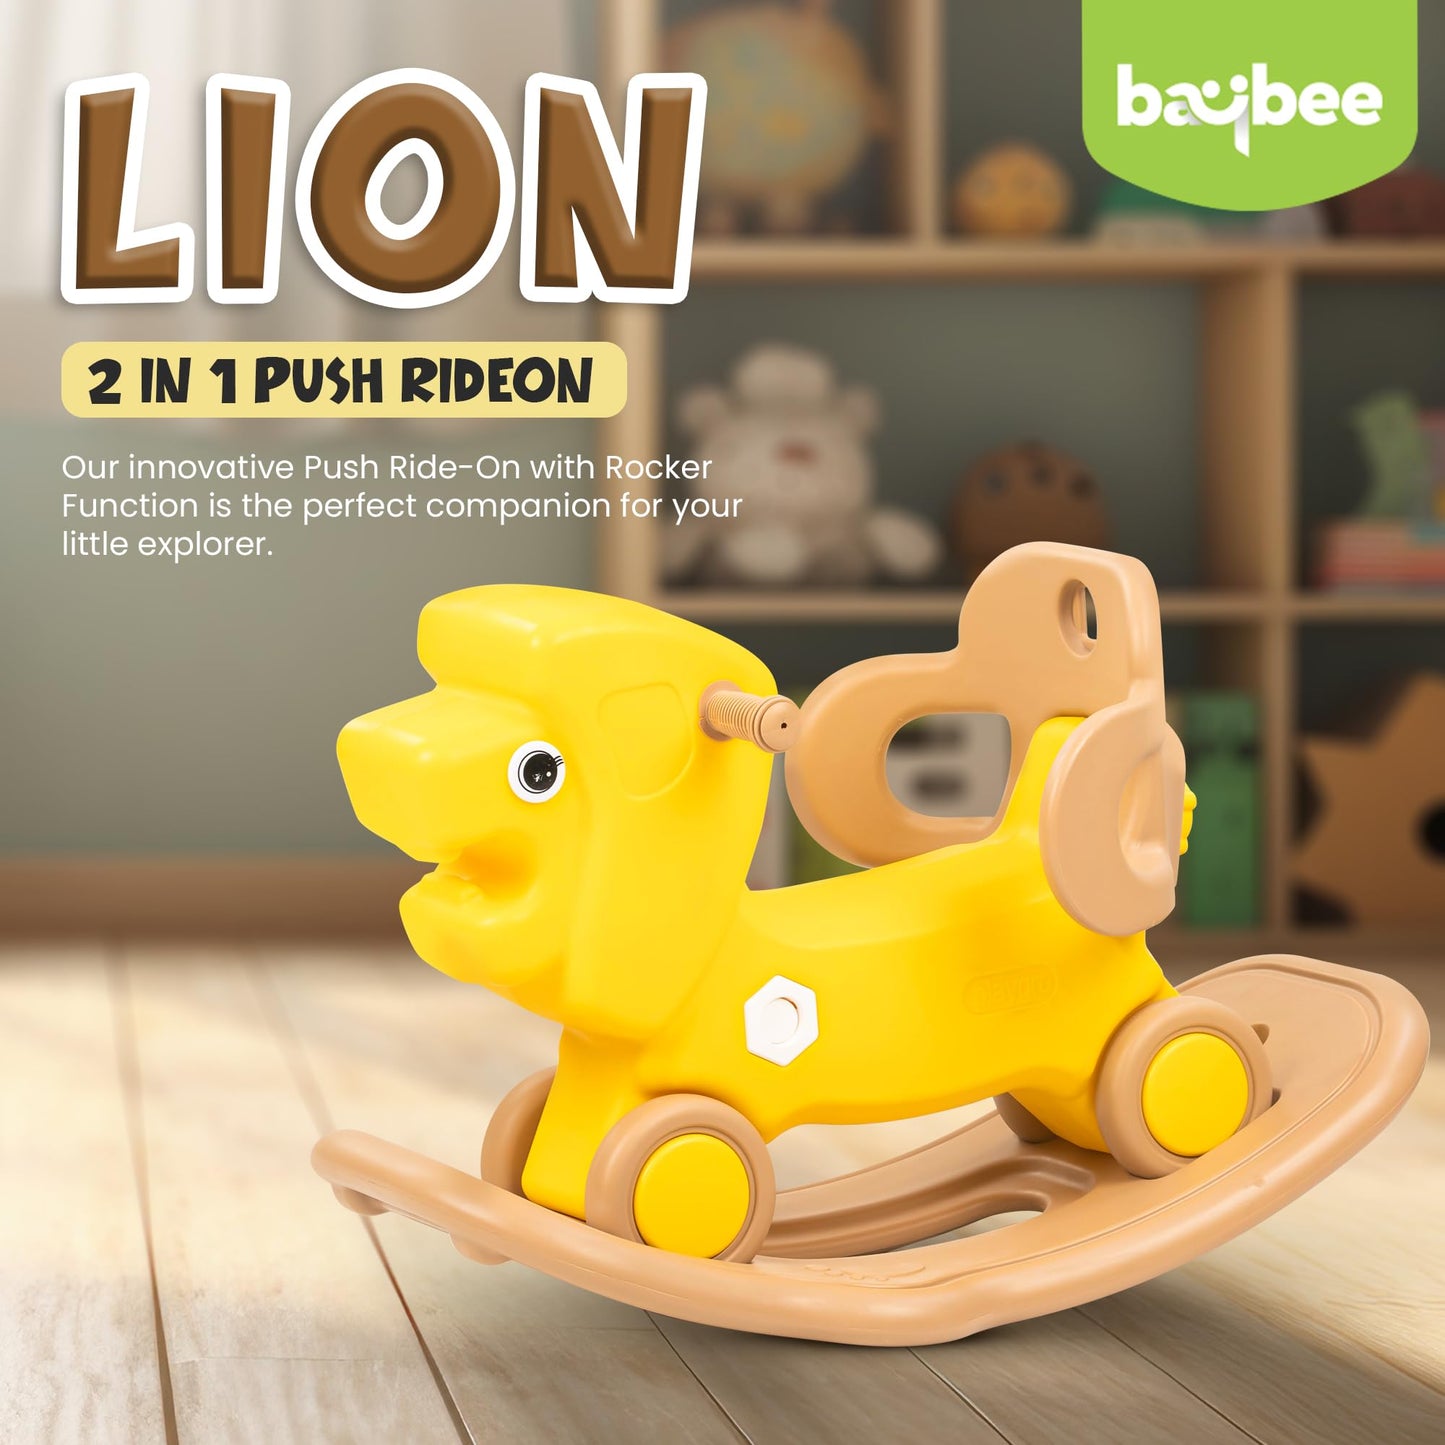 Baybee 2 in 1 Baby Horse Push Ride on Car with Rocker for Kids | Push Ride on Toy with Handle & Safety Guardrail, Baby Car Rocking Chair for Kids | Indoor Outdoor Play for 1 to 3 Year Boy Girl (Lion)